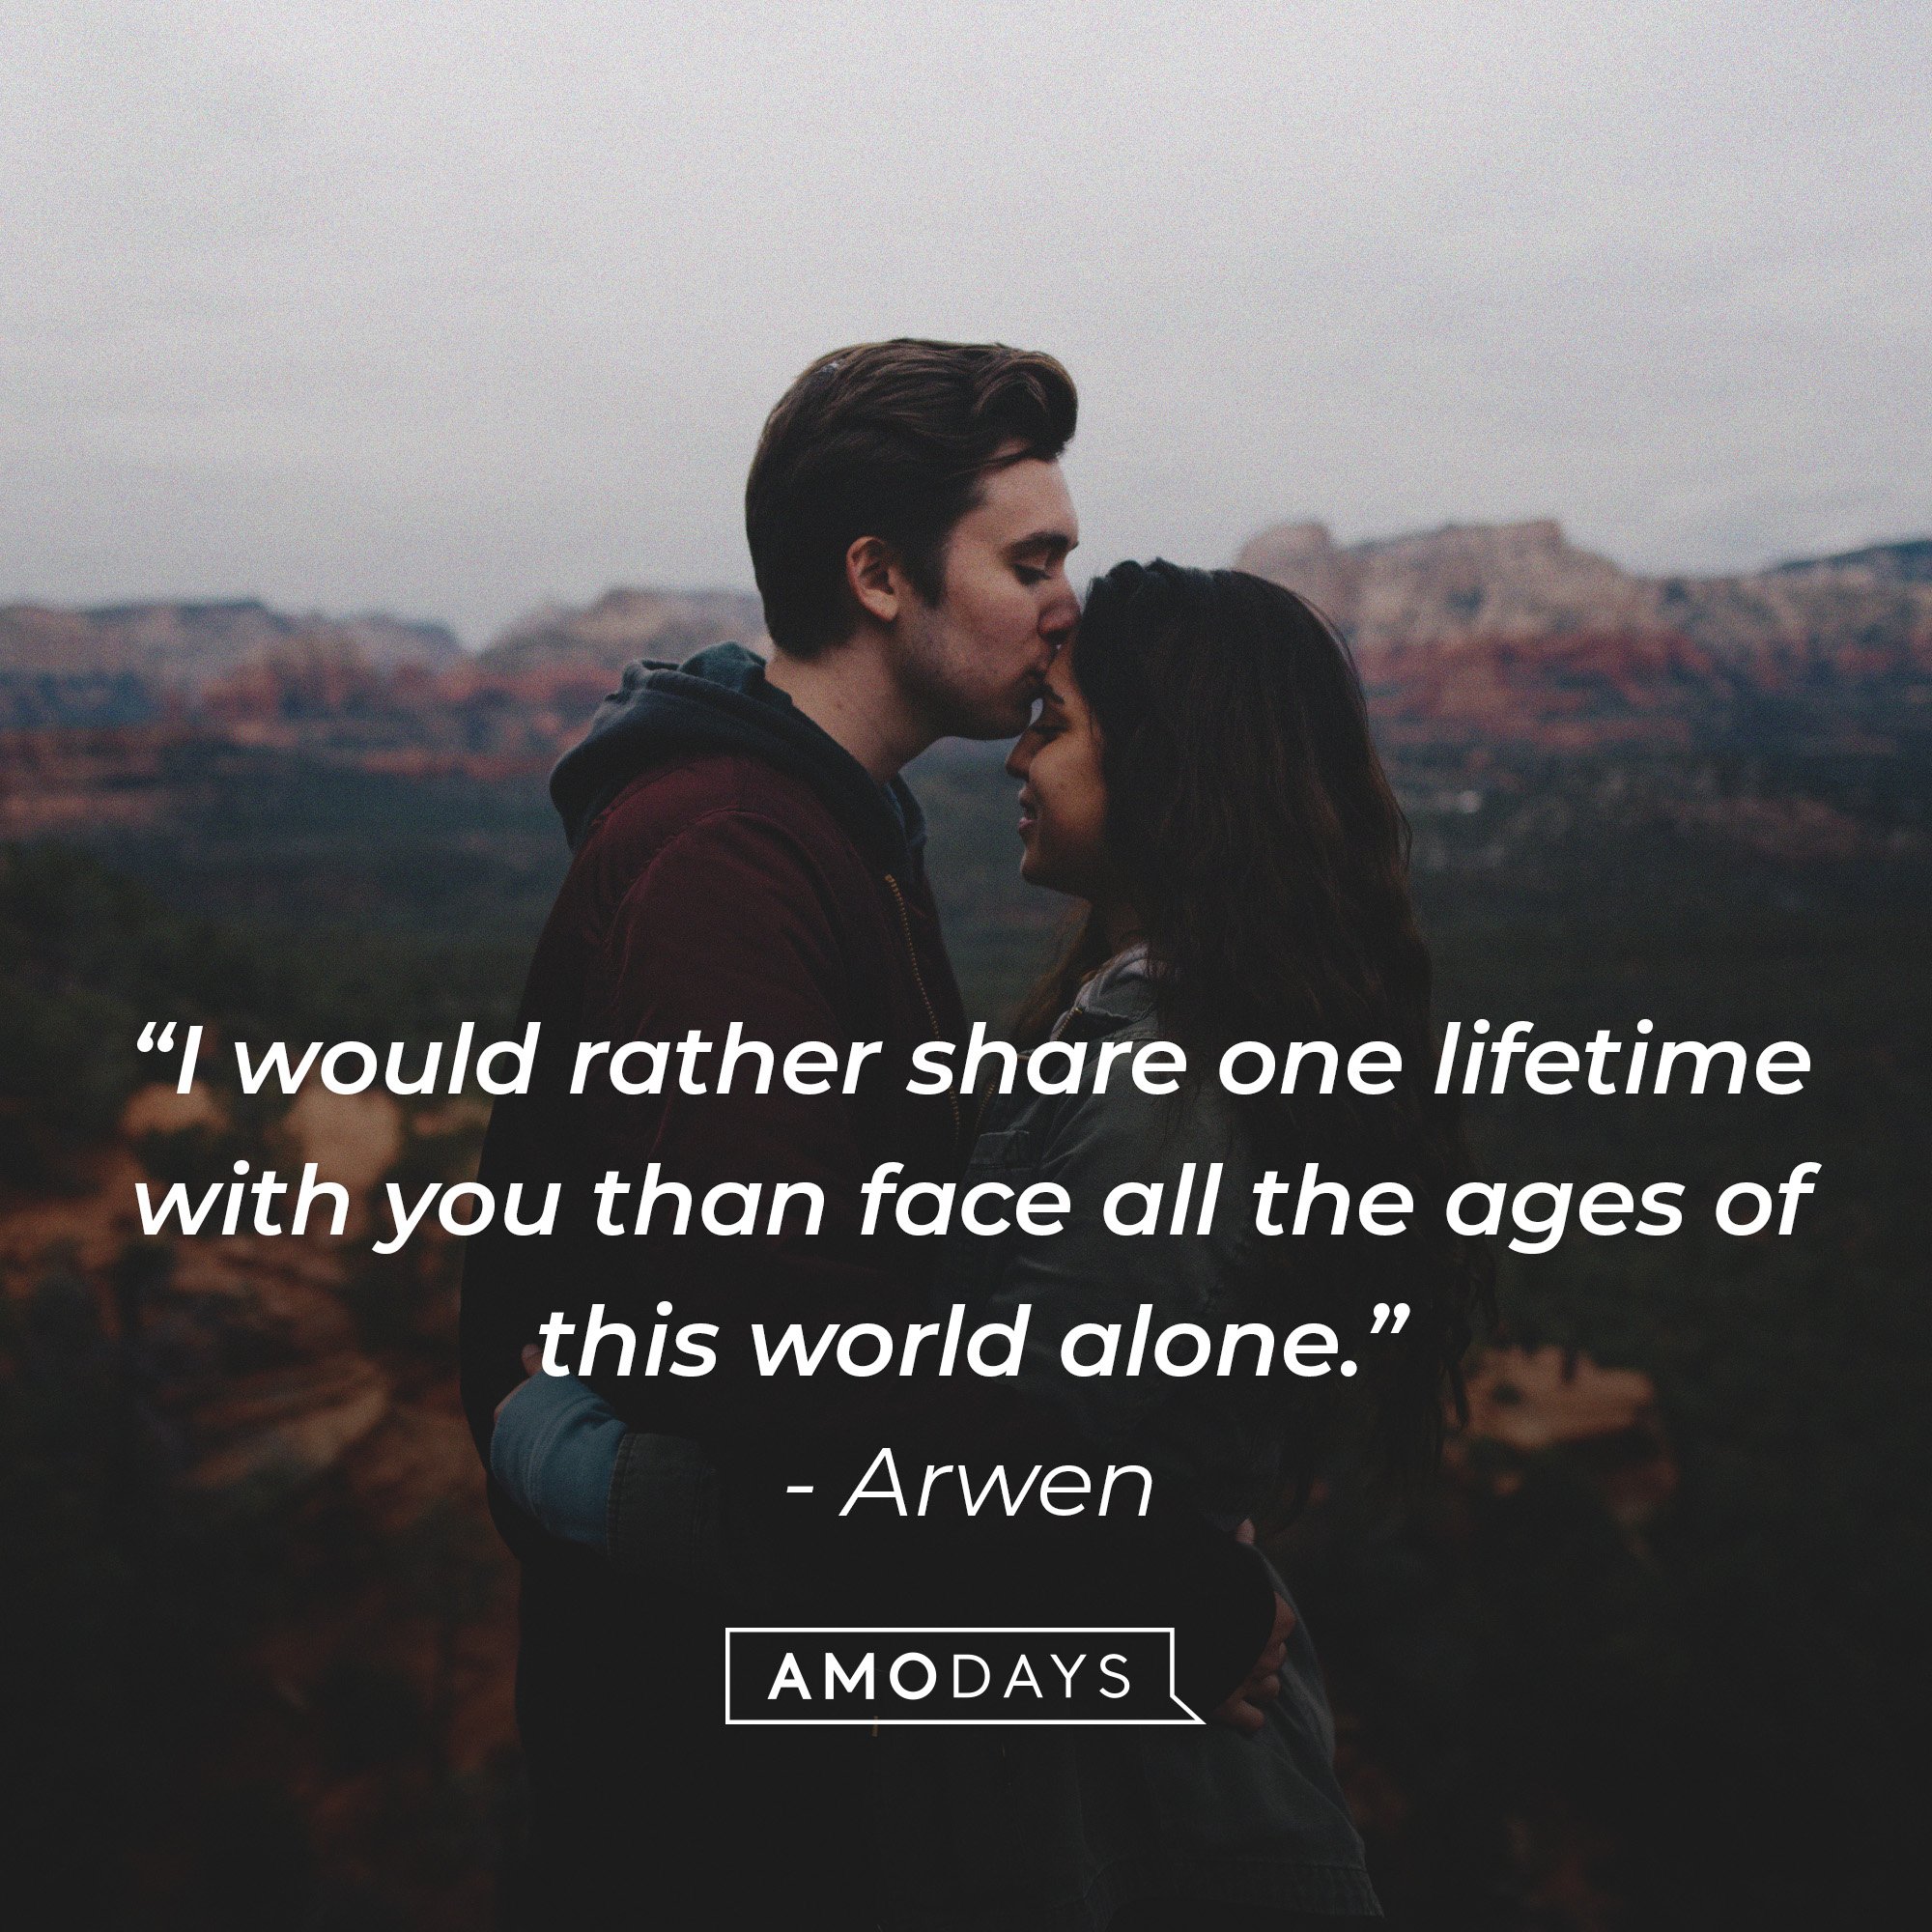 Arwen's quote: “I would rather share one lifetime with you than face all the ages of this world alone.” | Image: AmmoDays